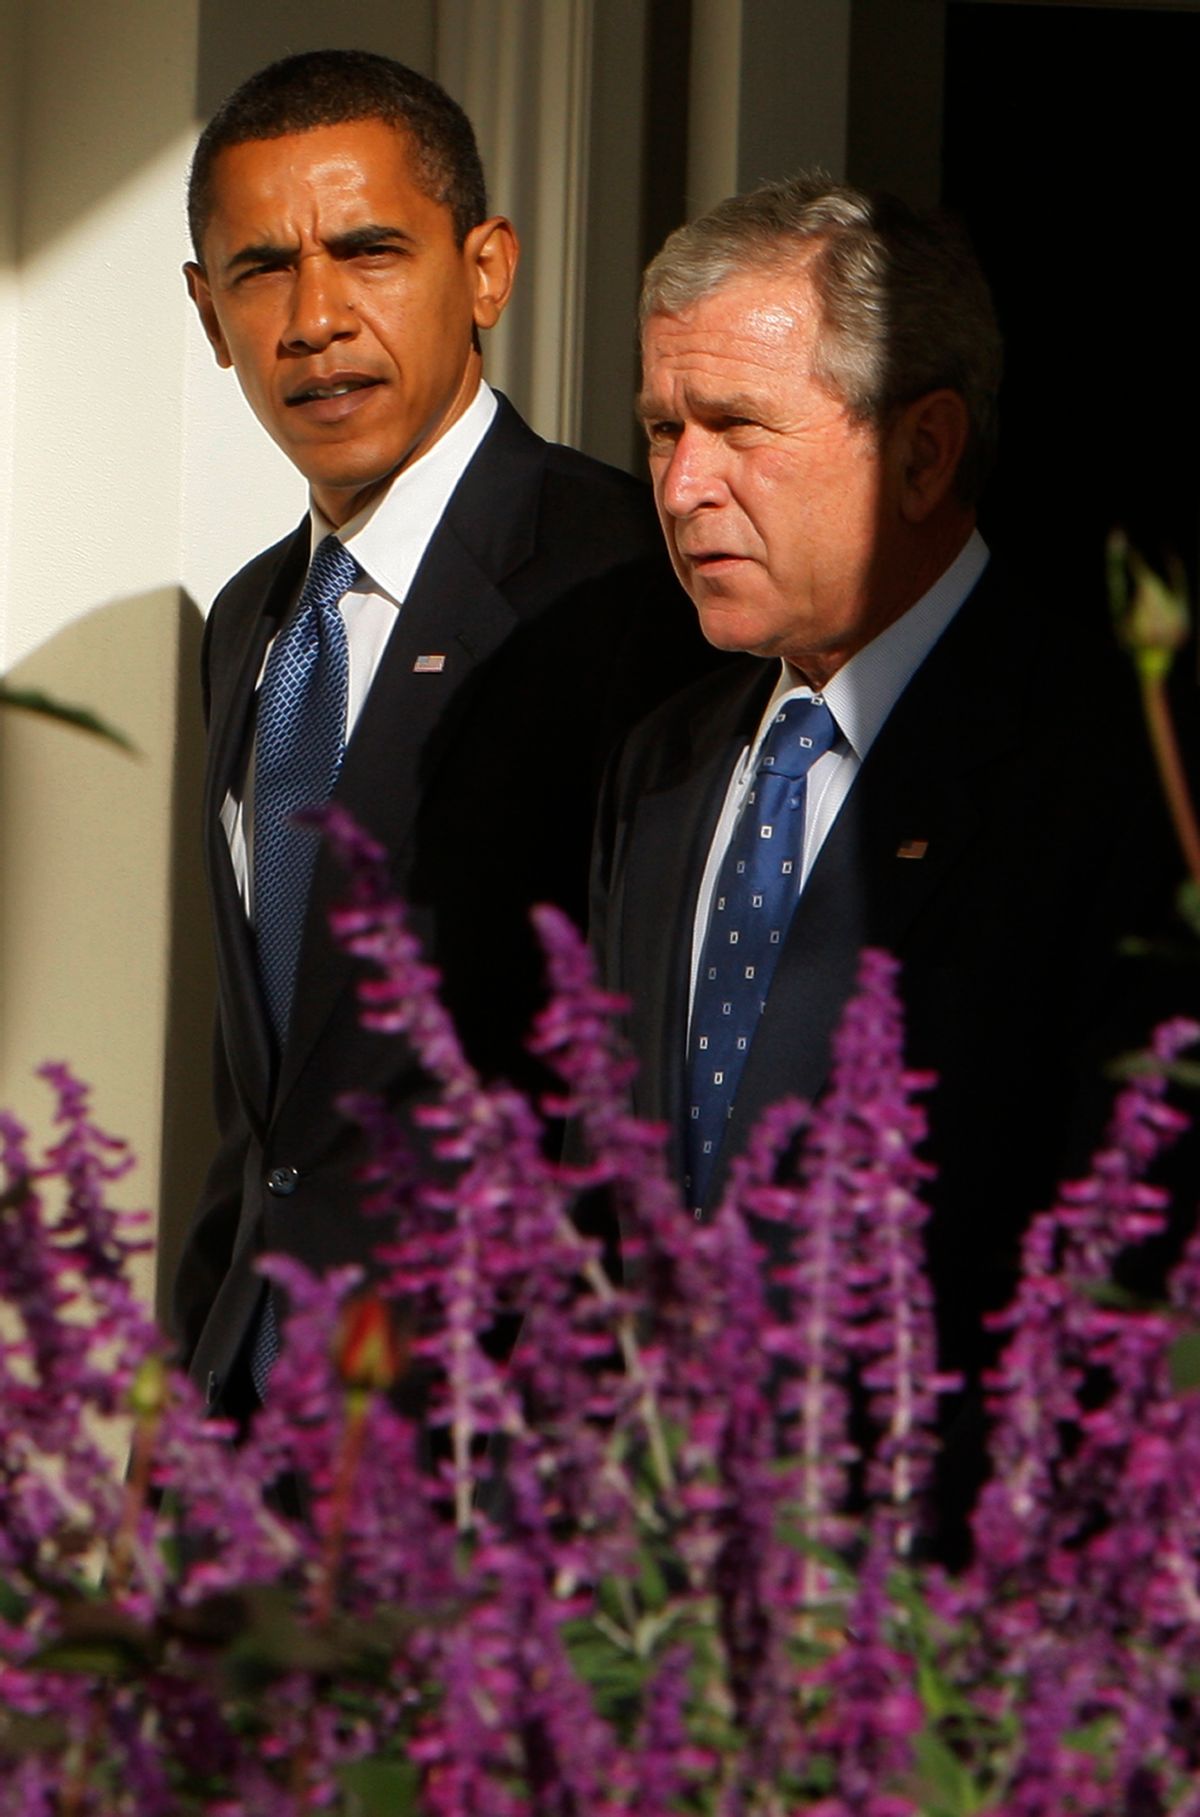 President Bush and President-elect Obama walk along the West Wing Colonnade of the White House in Washington, Monday, Nov. 10, 2008 prior to their meeting in the Oval Office. (AP Photo/Charles Dharapak) (Associated Press)